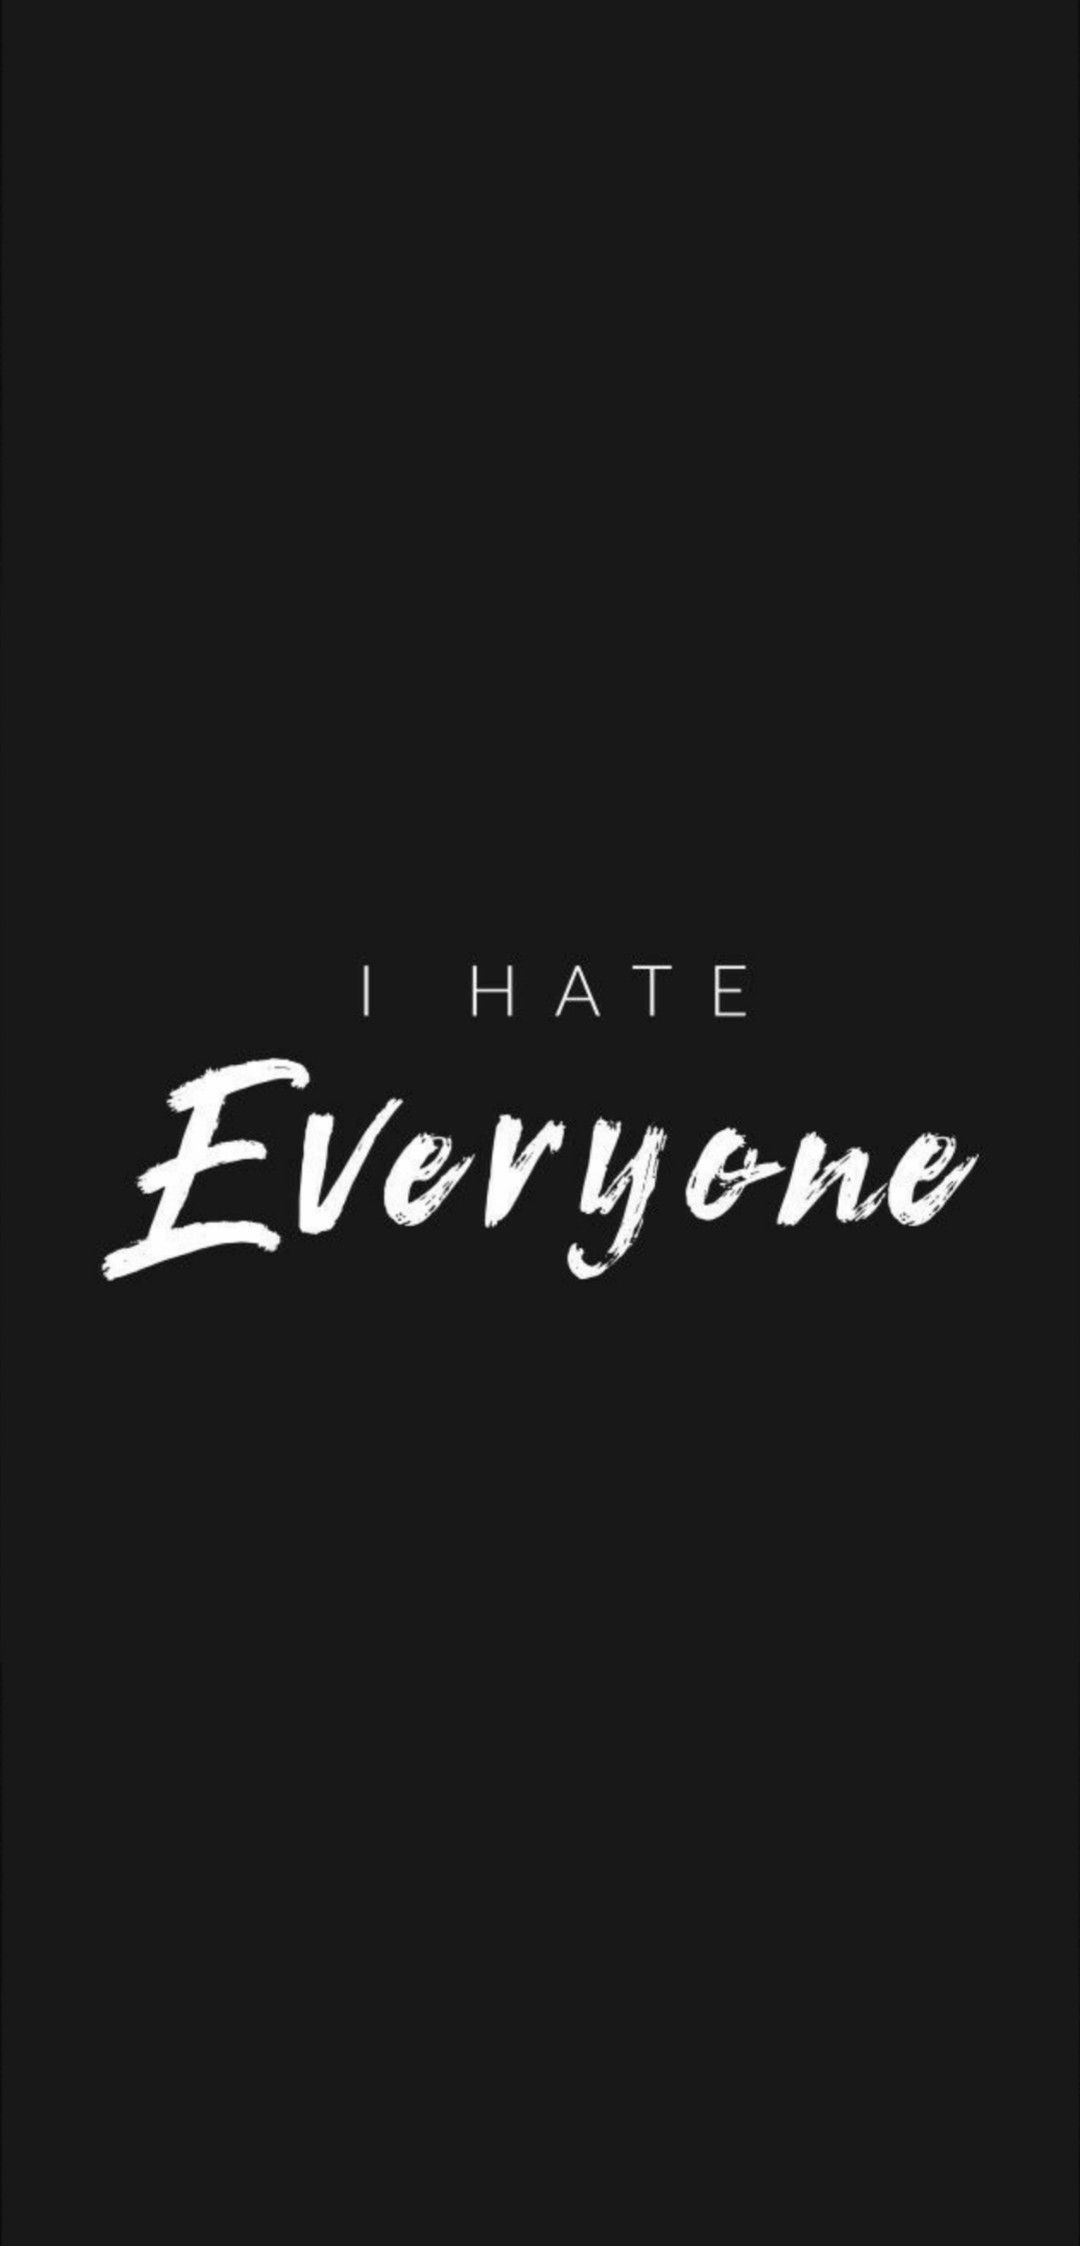 I hate everyone wallpapers